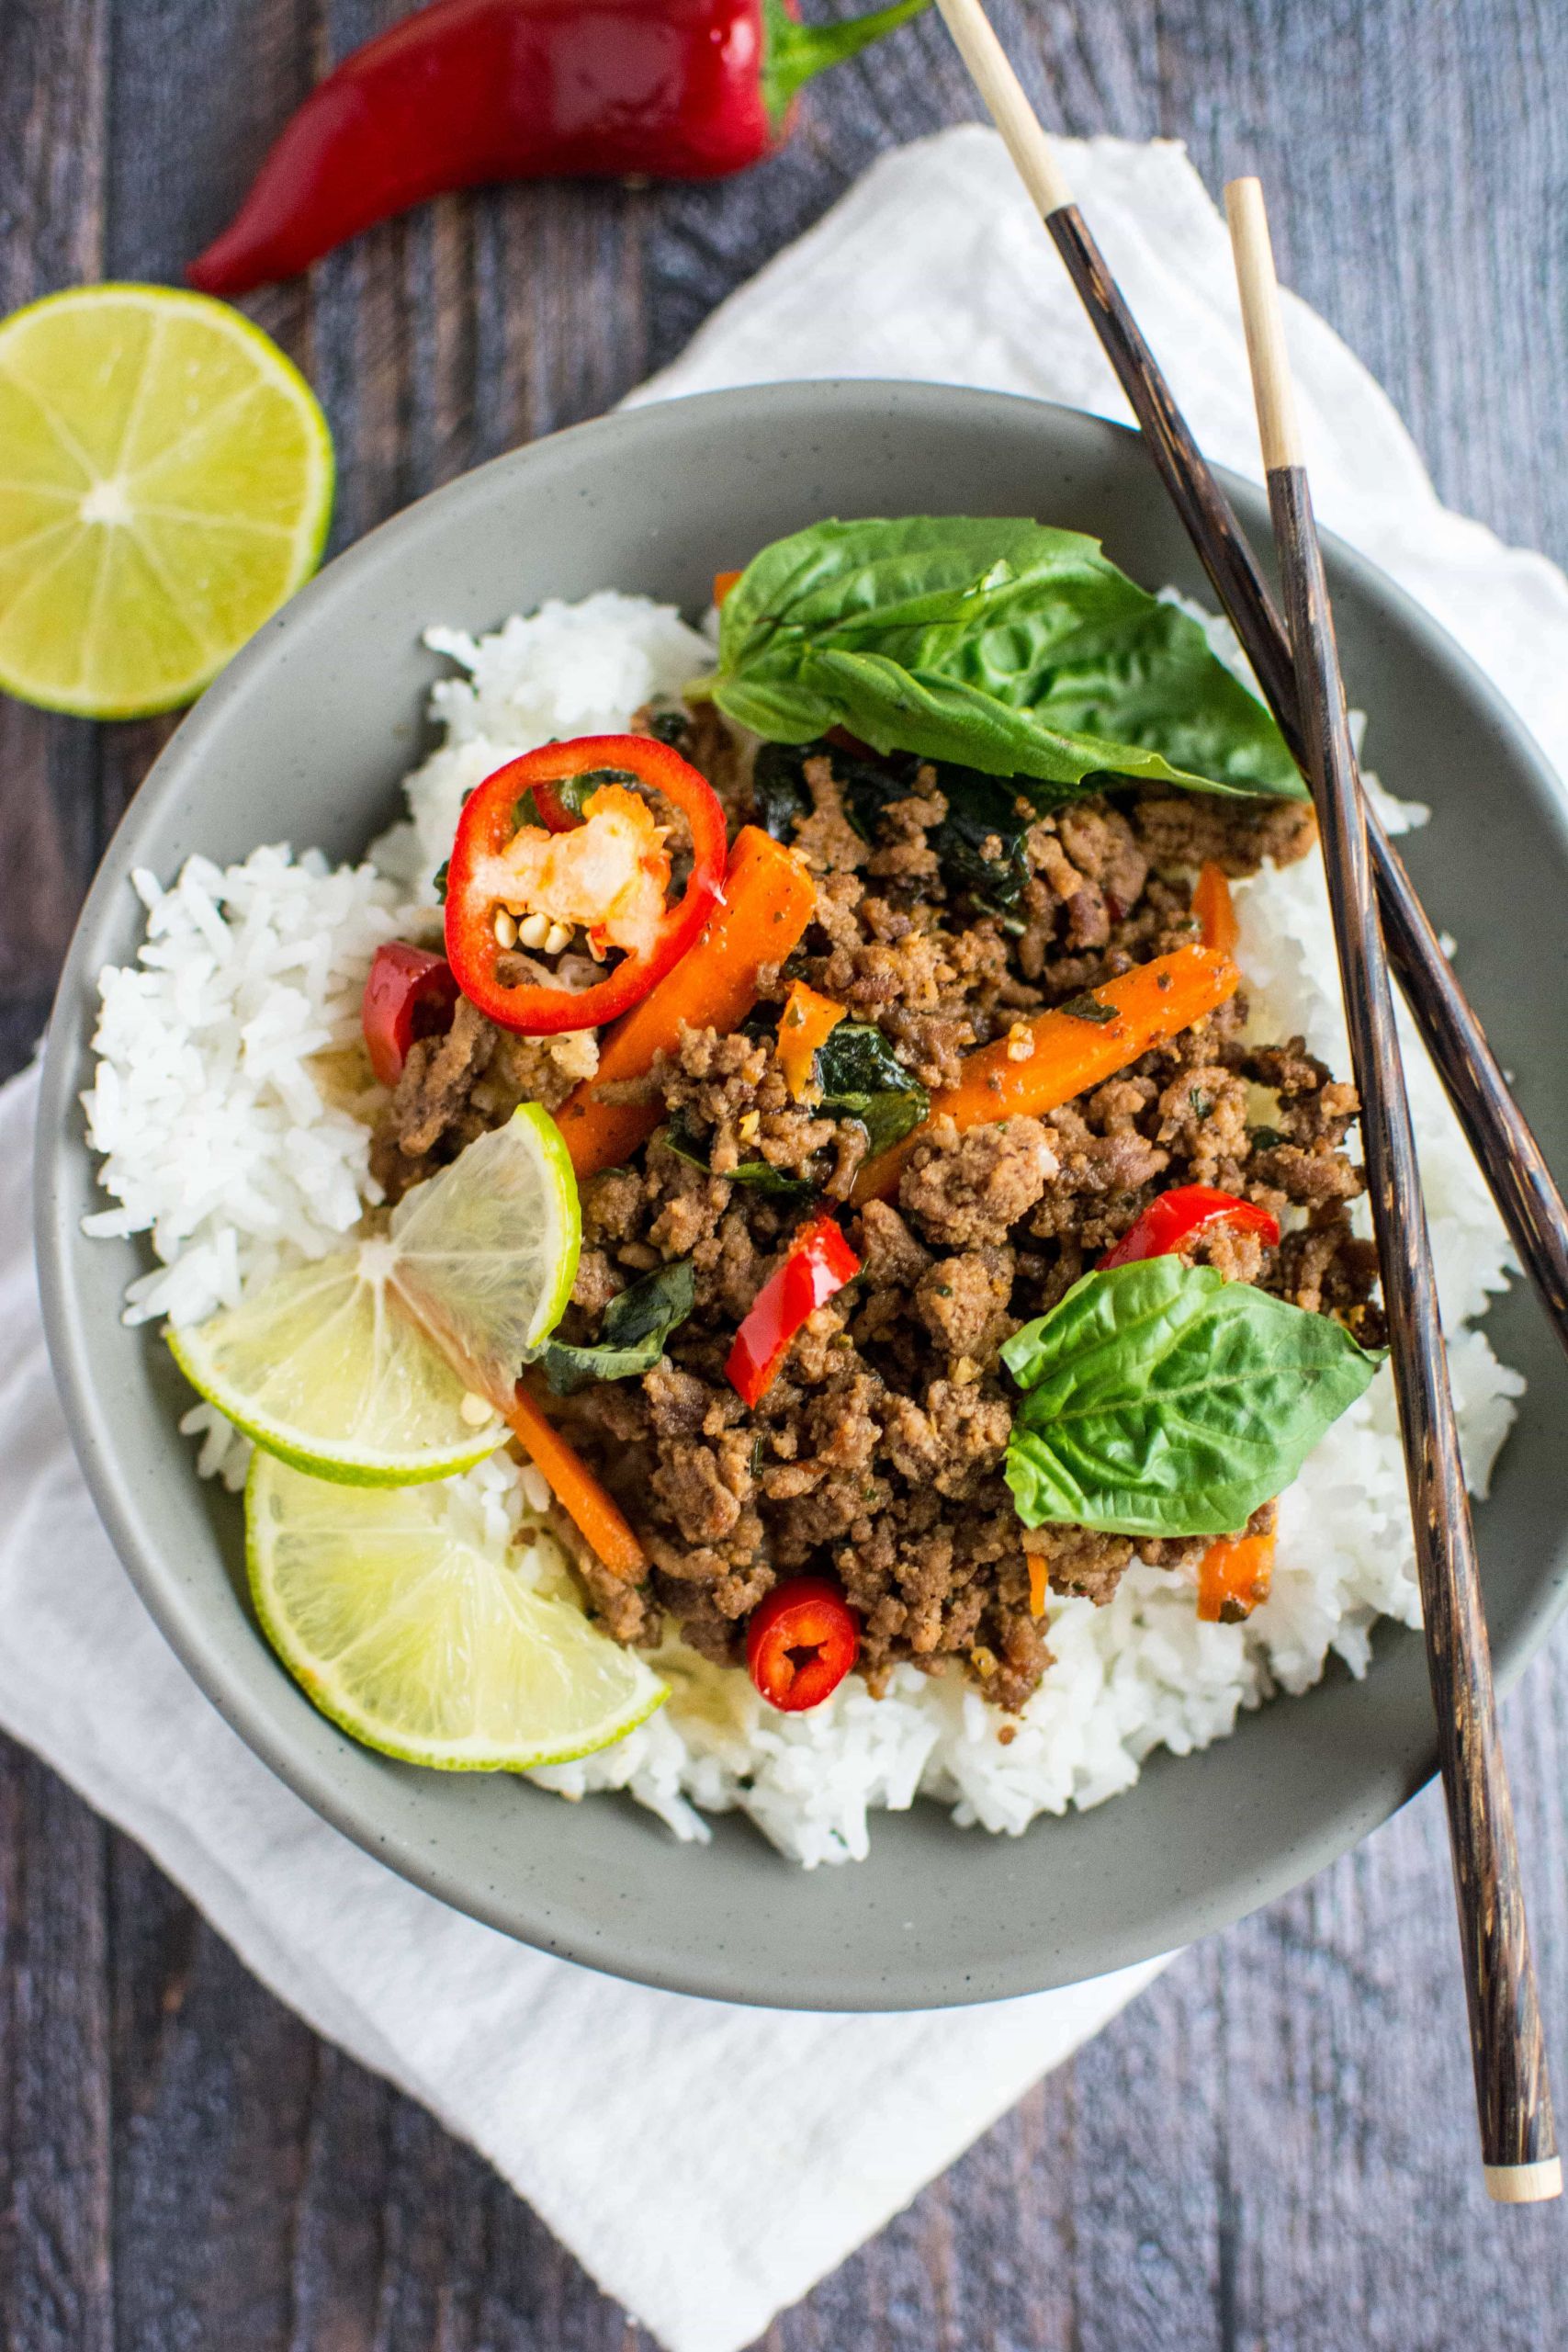 Gourmet Ground Beef Recipes
 Quick Fix Meal Thai Basil Beef Slow Cooker Gourmet